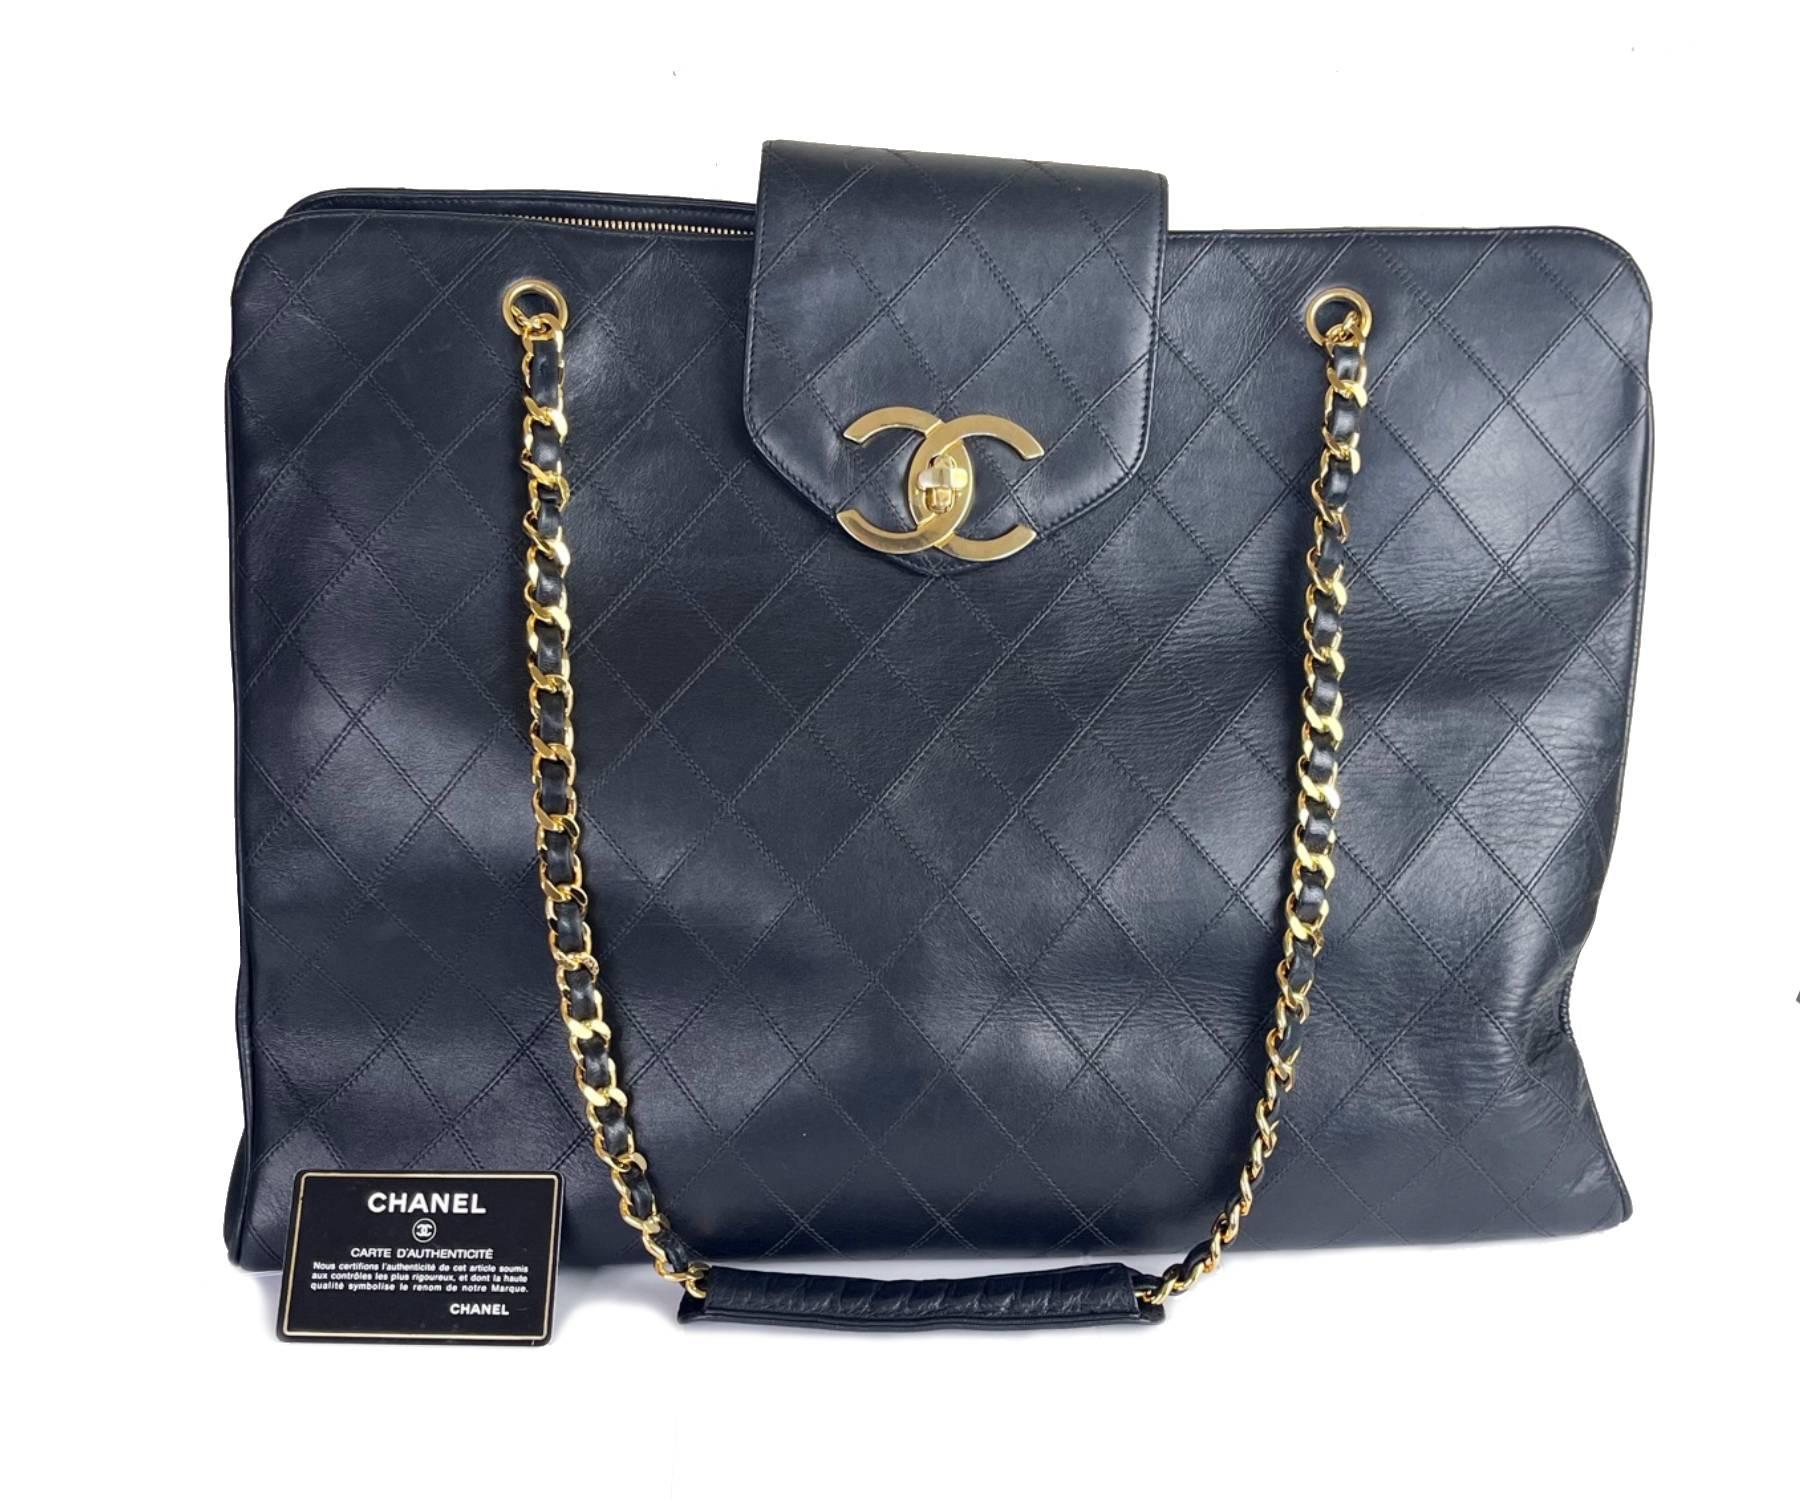 Chanel Diaper Bags - 2 For Sale on 1stDibs  baby chanel bags, chanel  deauville diaper bag, chanel baby diaper bag